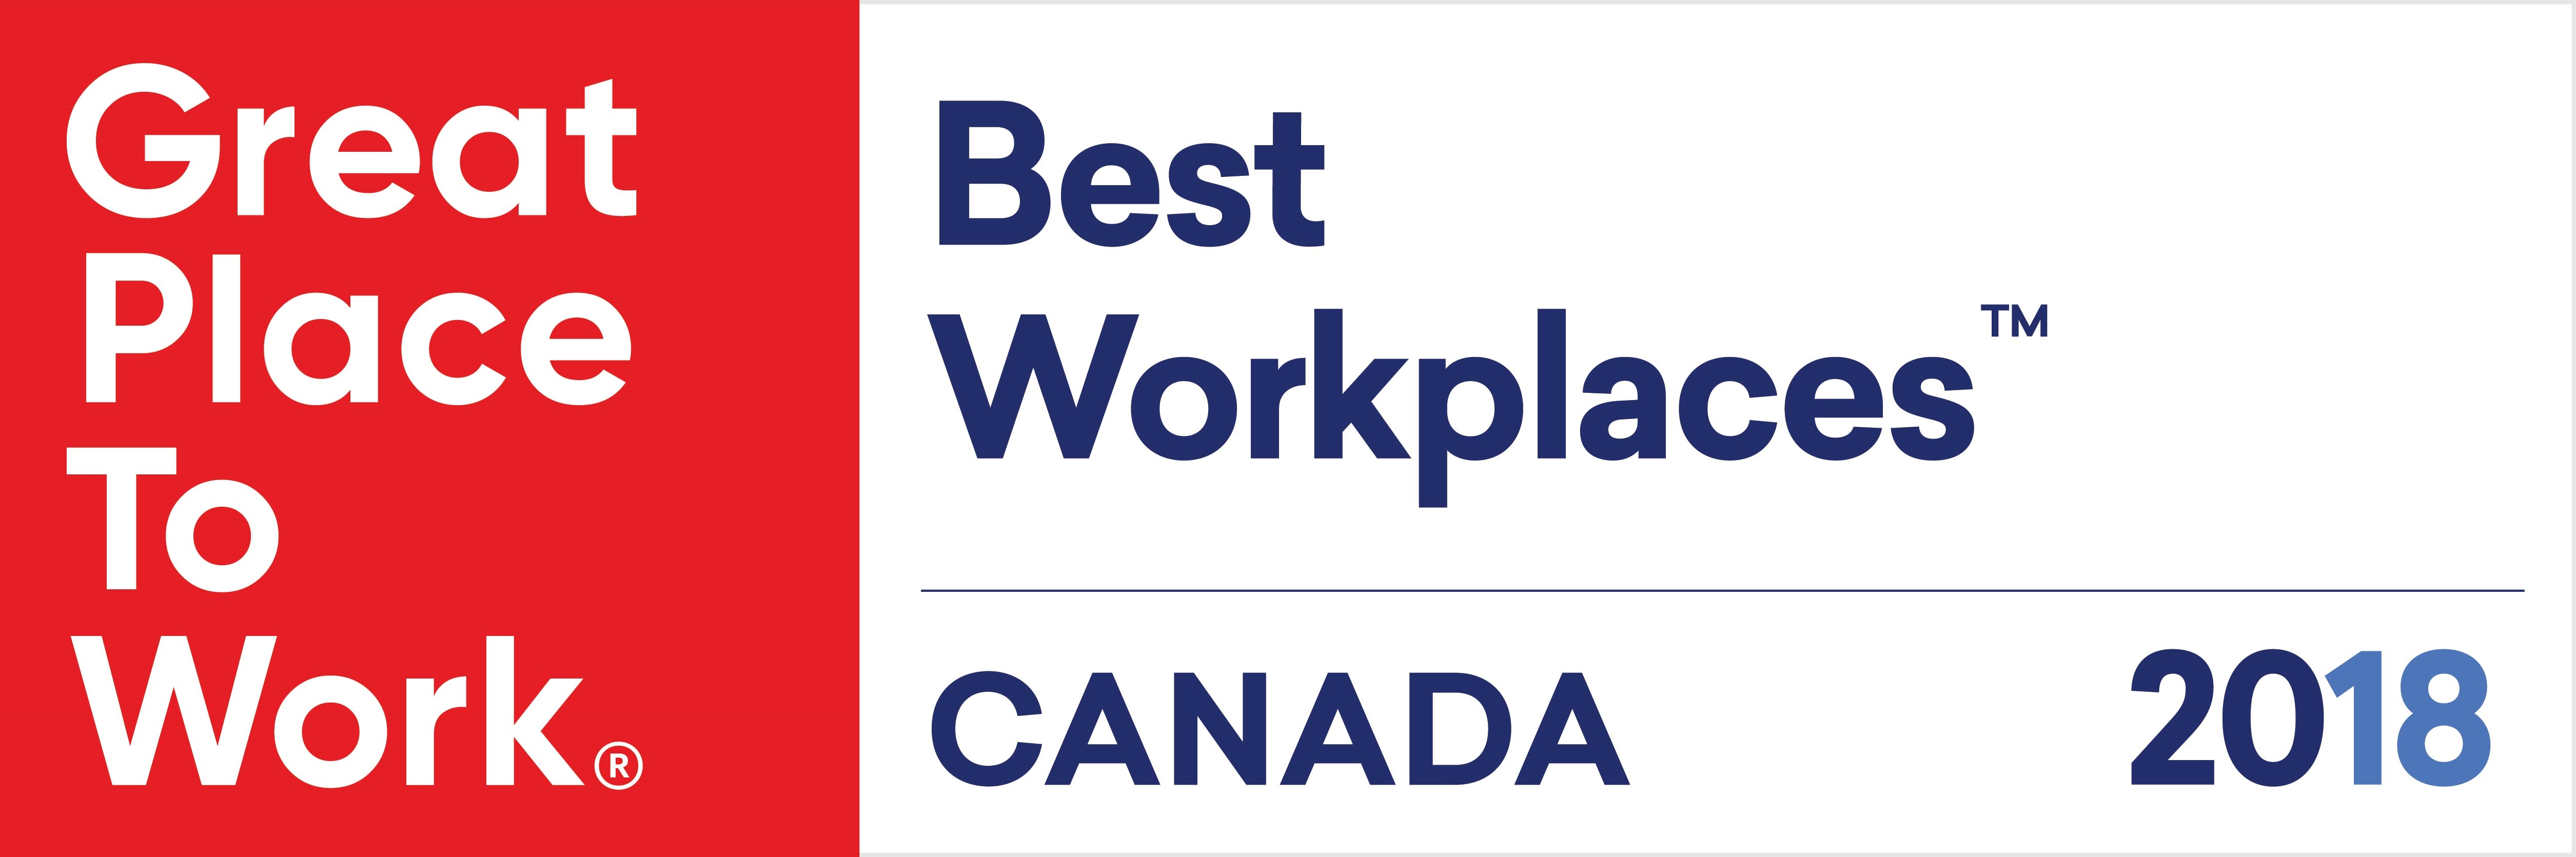 Electromate announces recognition as one of Best Workplaces in Canada